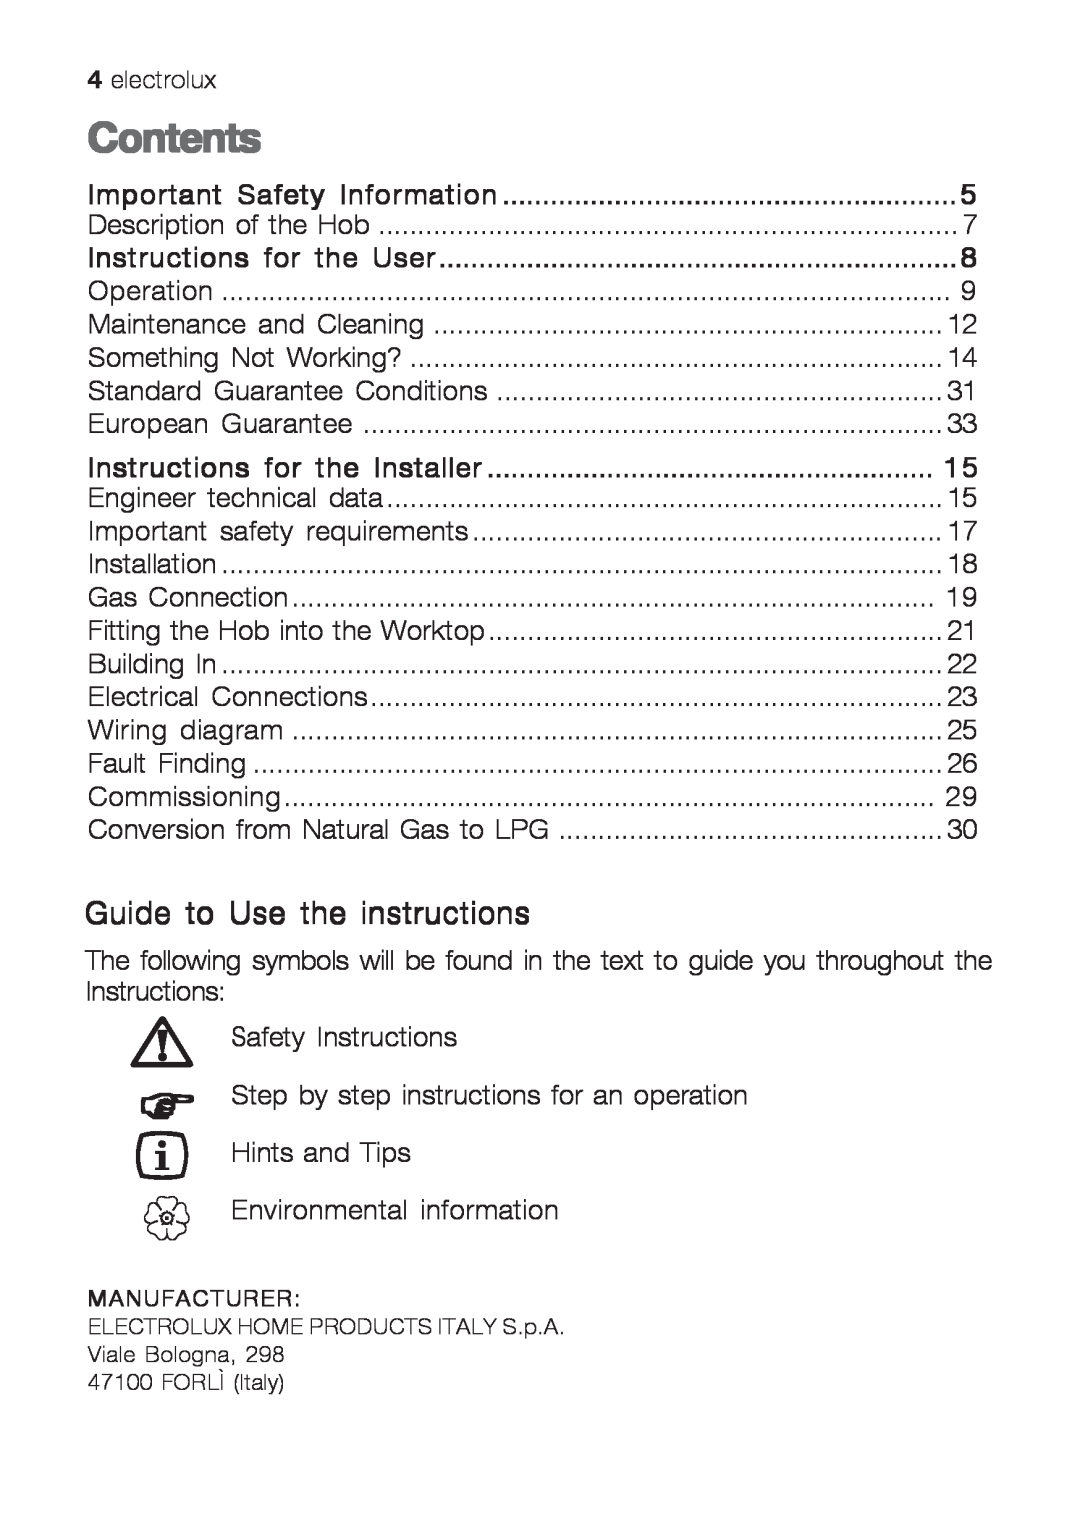 Electrolux EHG 6402, EHG 6412, EHG 6832 manual Contents, Guide to Use the instructions 